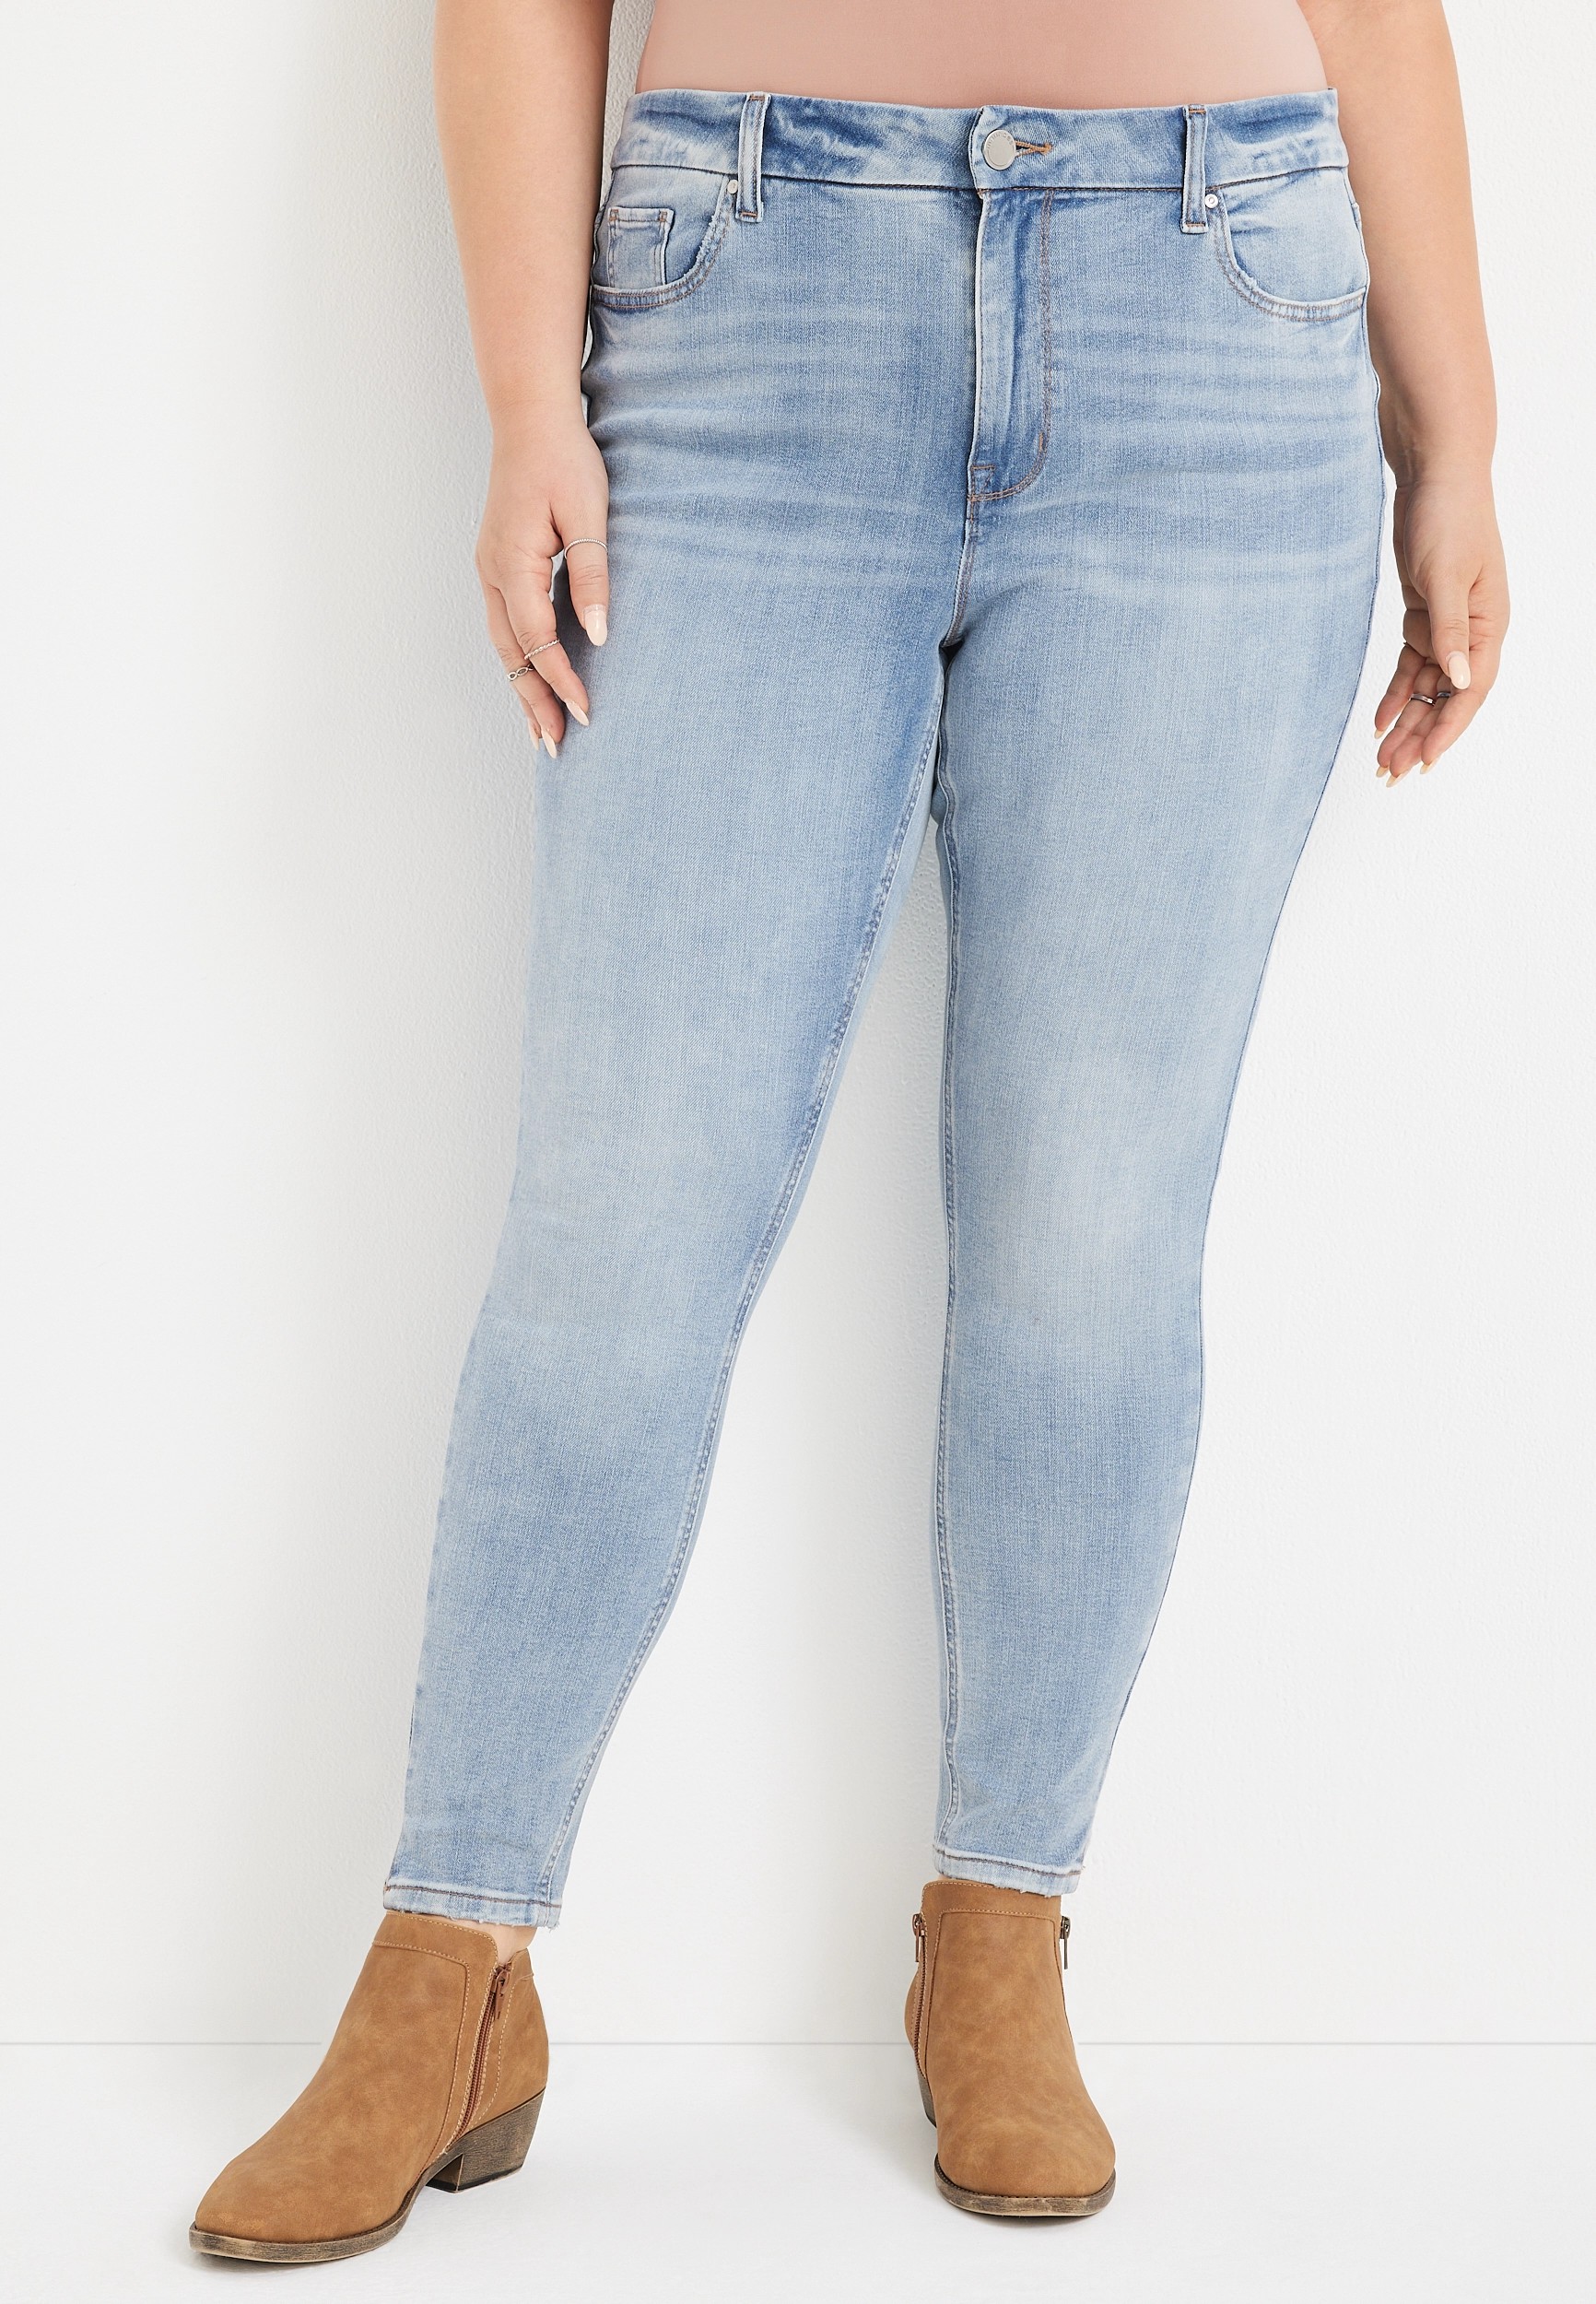 Plus Size m jeans by maurices™ Limitless High Rise Slit Hem Jegging ...